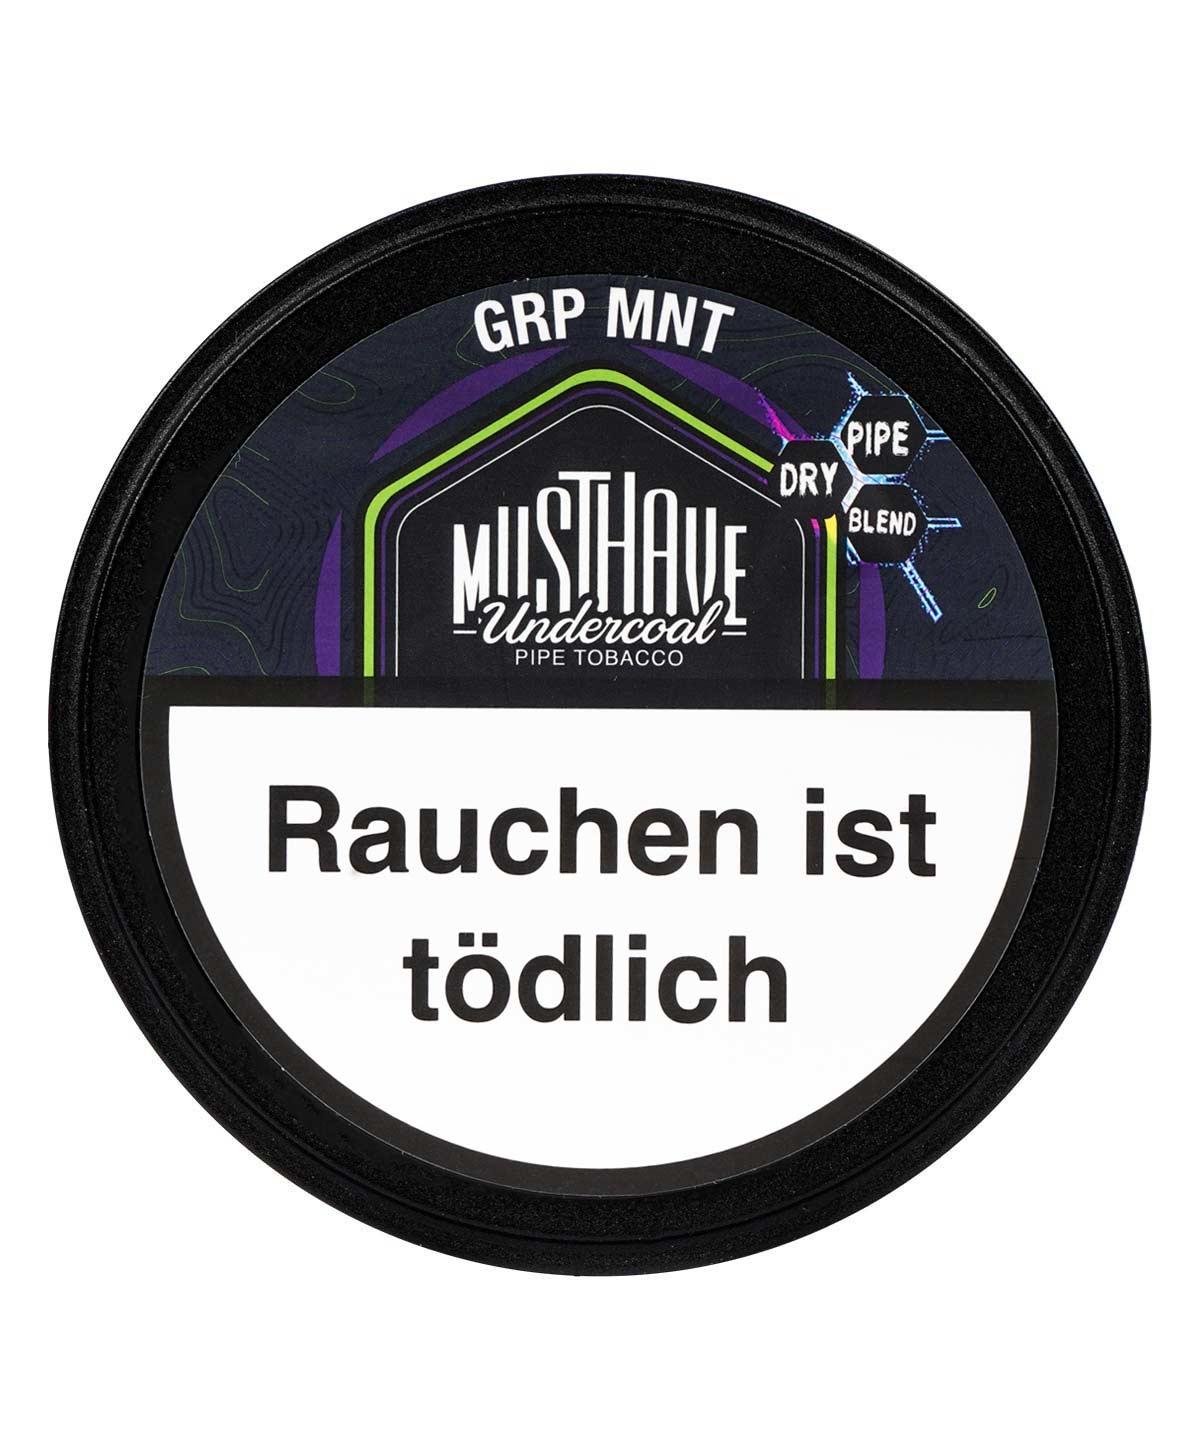 Musthave Grp Mnt Dry Base 70g